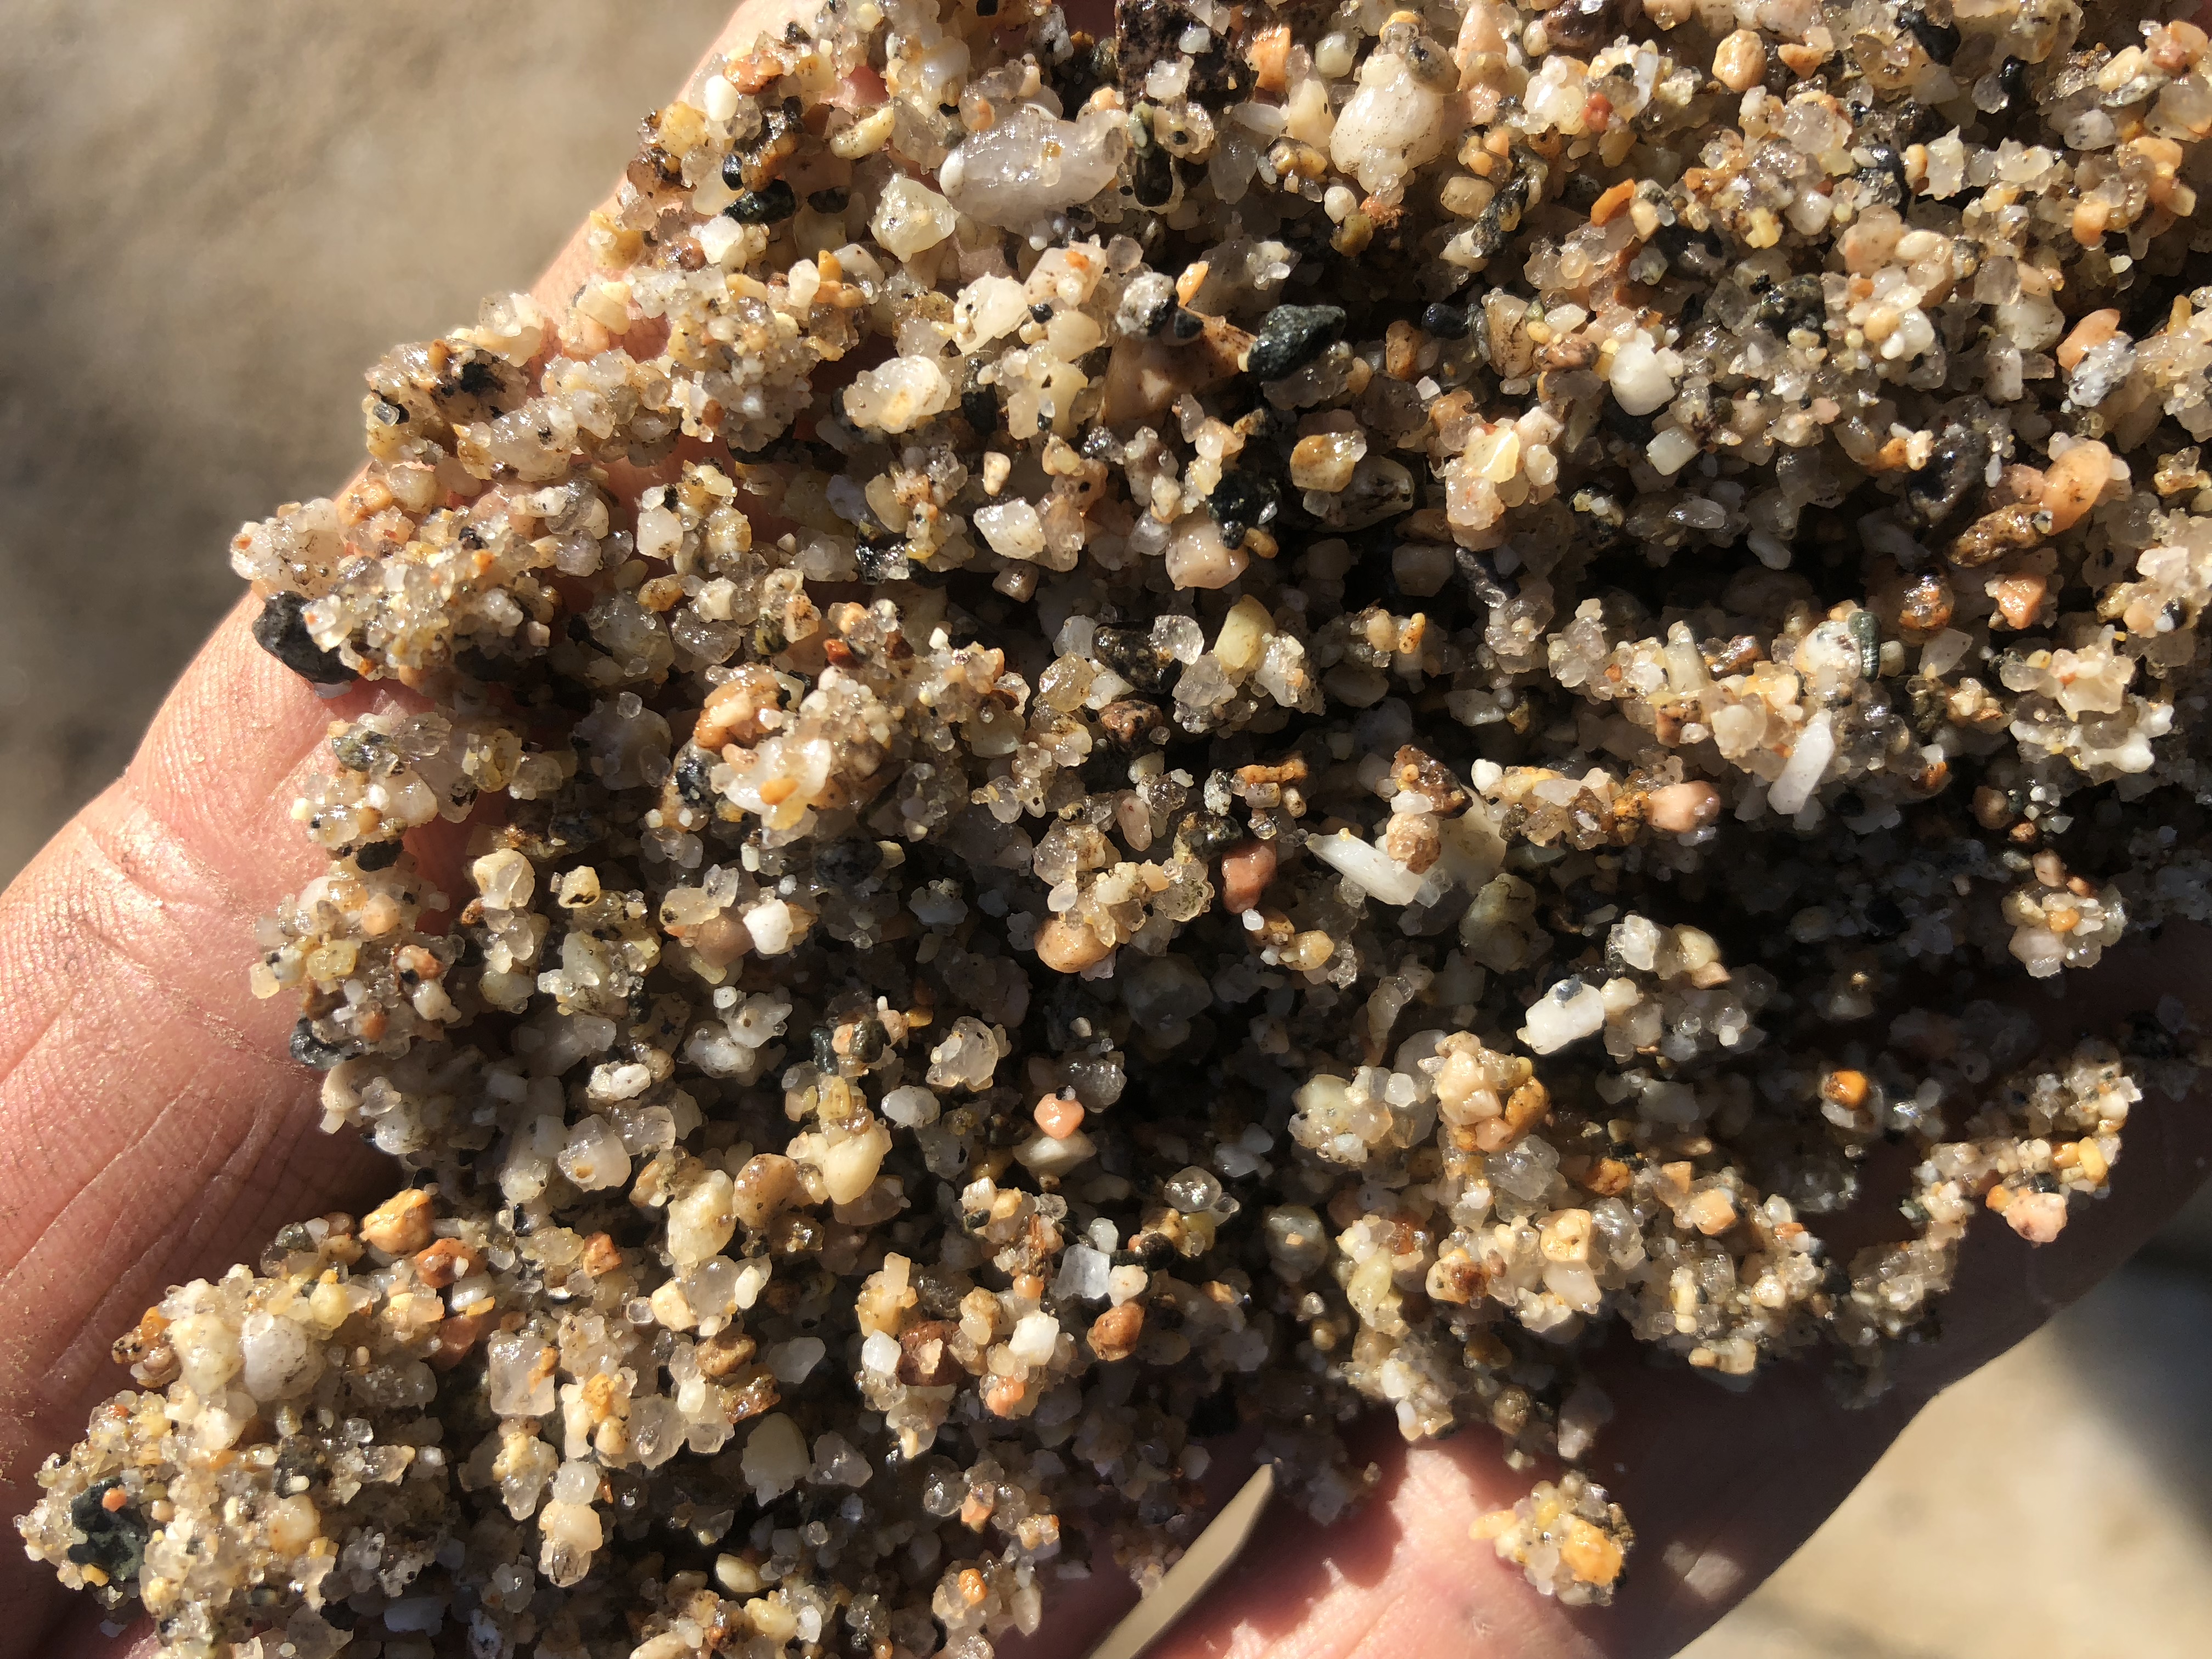 a handful of sand and gravel.